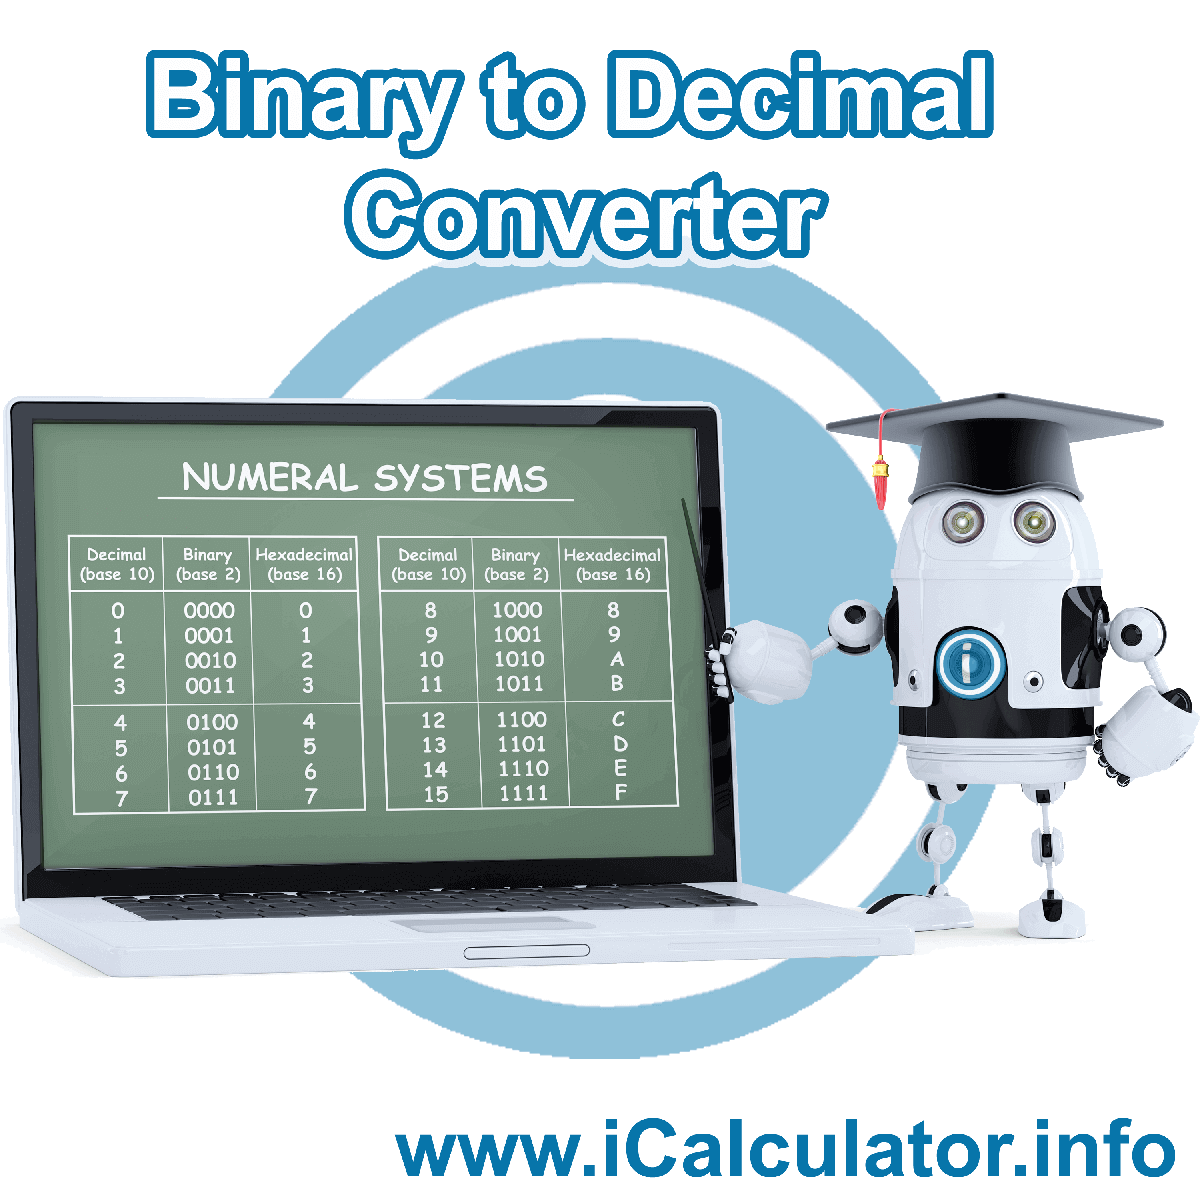 Binary to Decimal Converter. This image shows the properties and formula for Binary to Decimal Converter